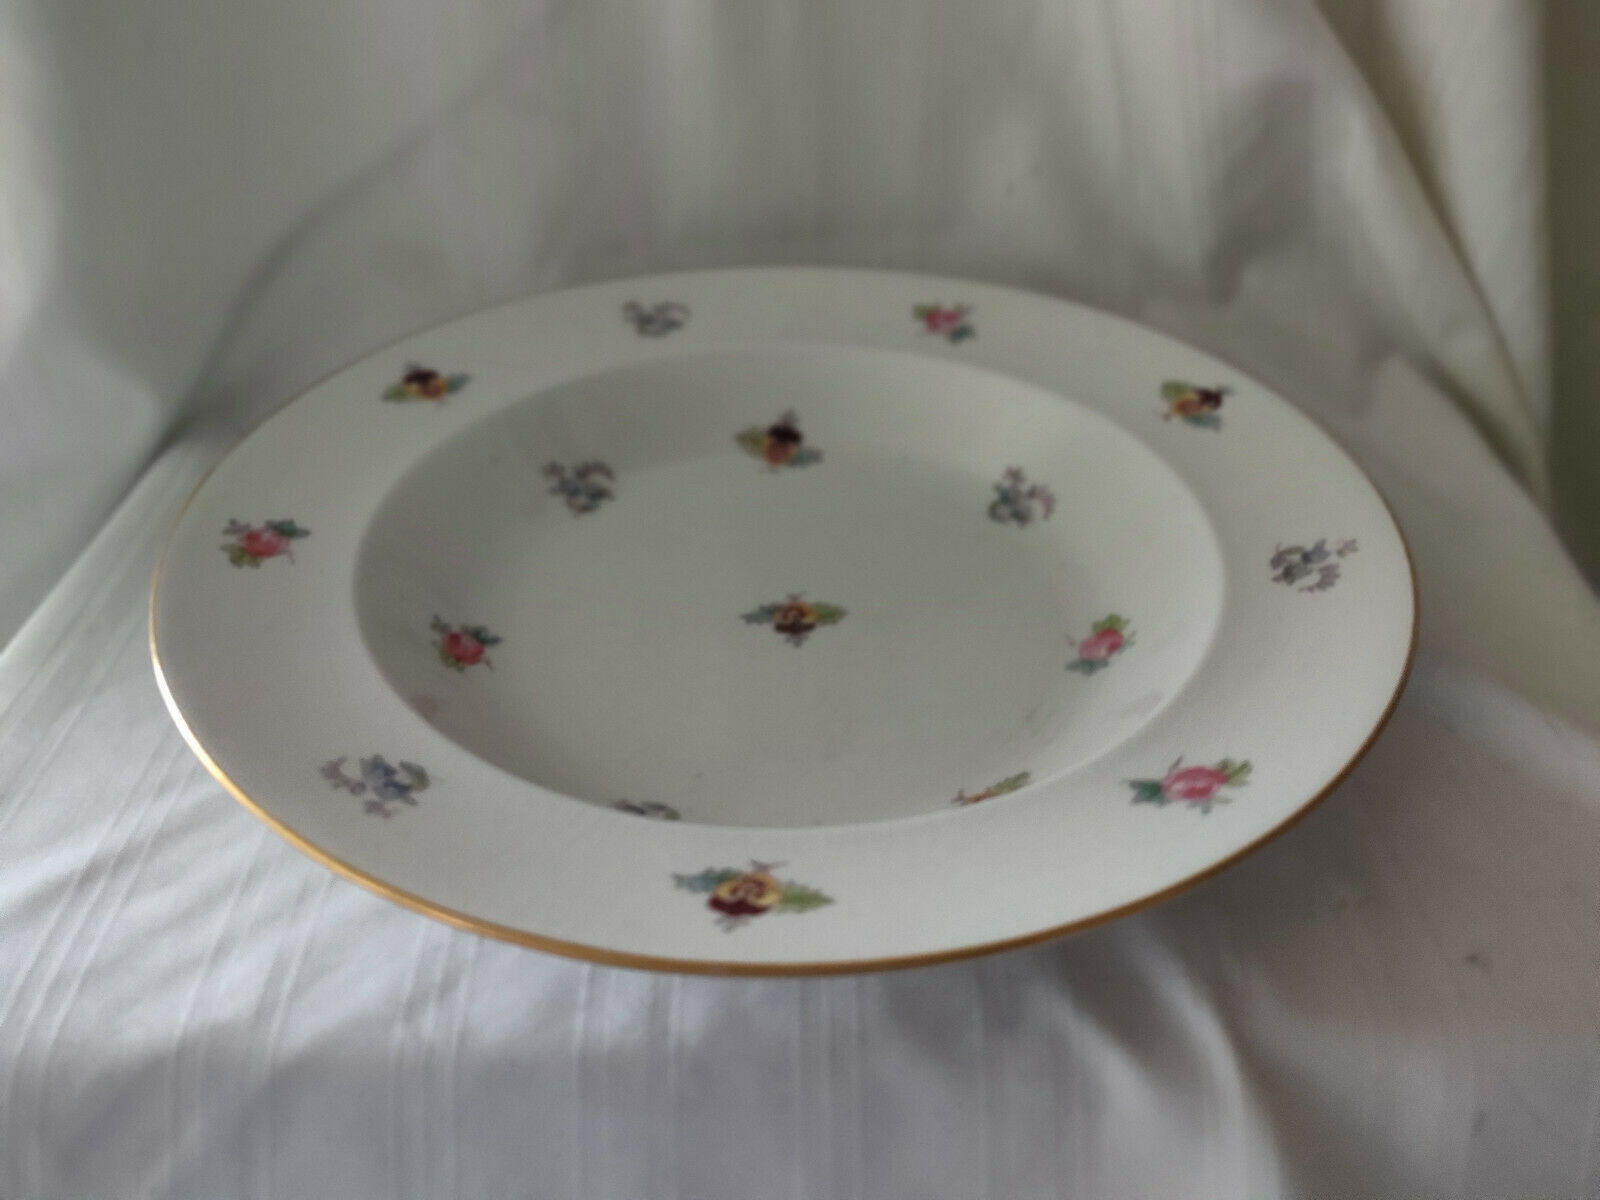 Booths Silicon China England Large Rimmed Soup Pasta Bowl Pansies Roses Flowers